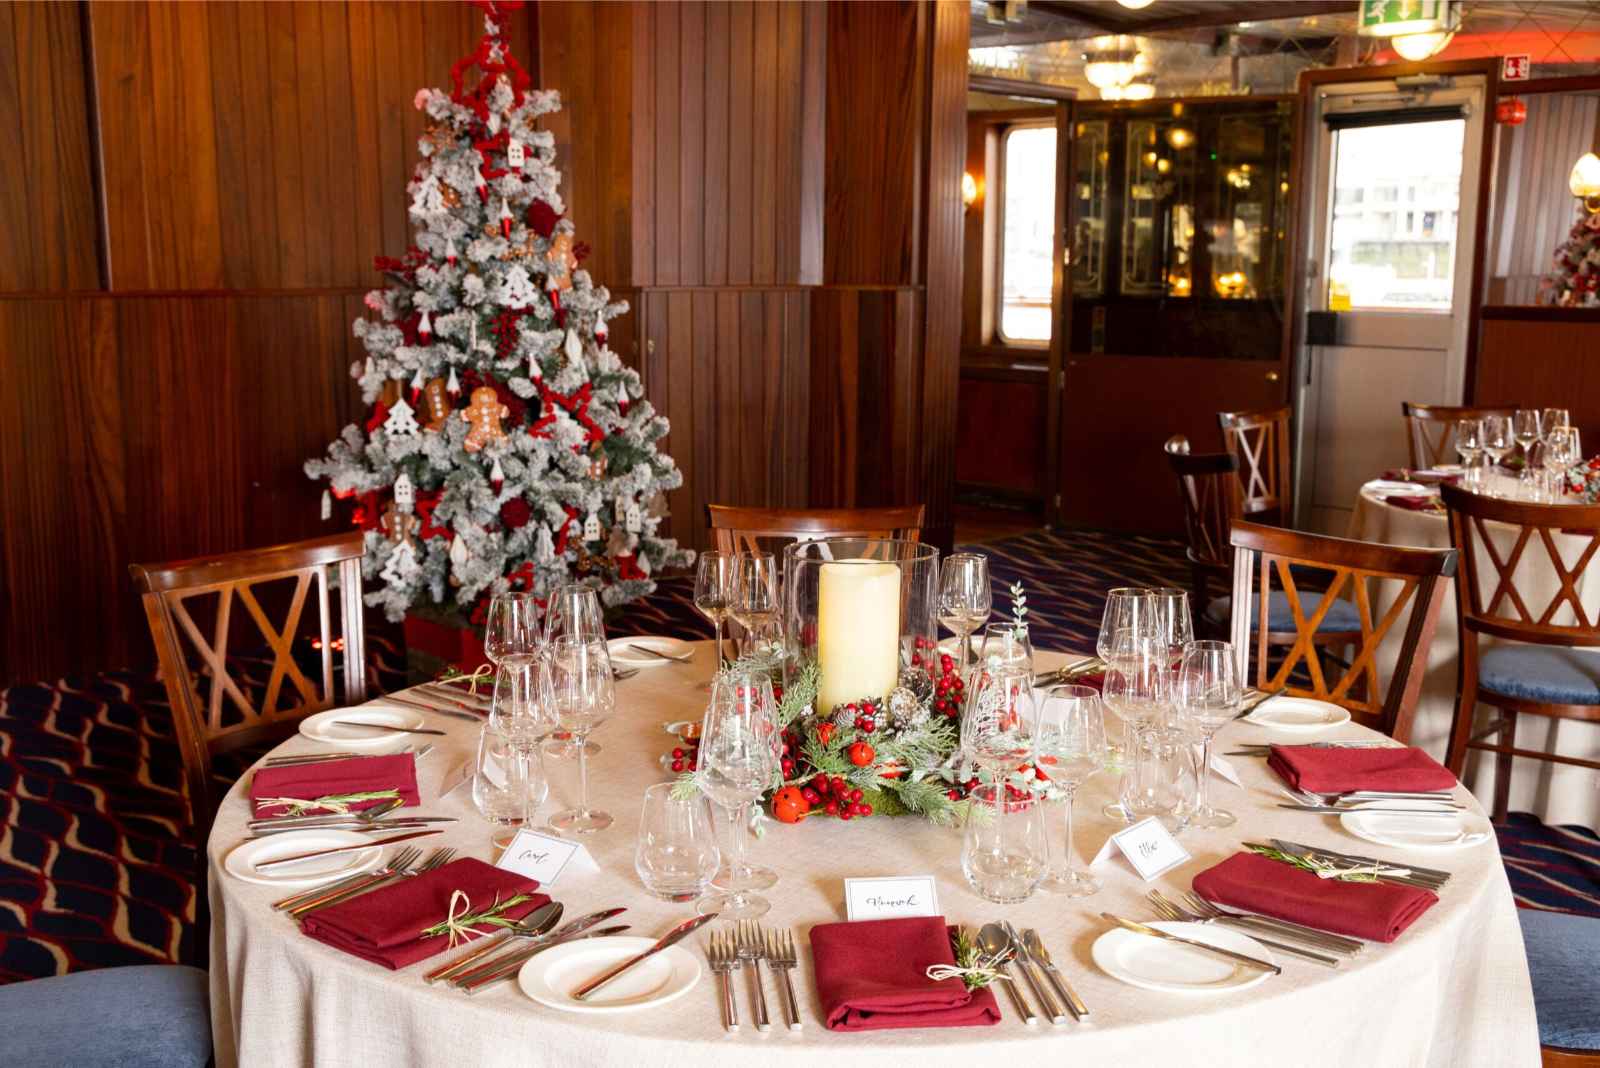 Thames luxury charters dixie queen christmas dinner